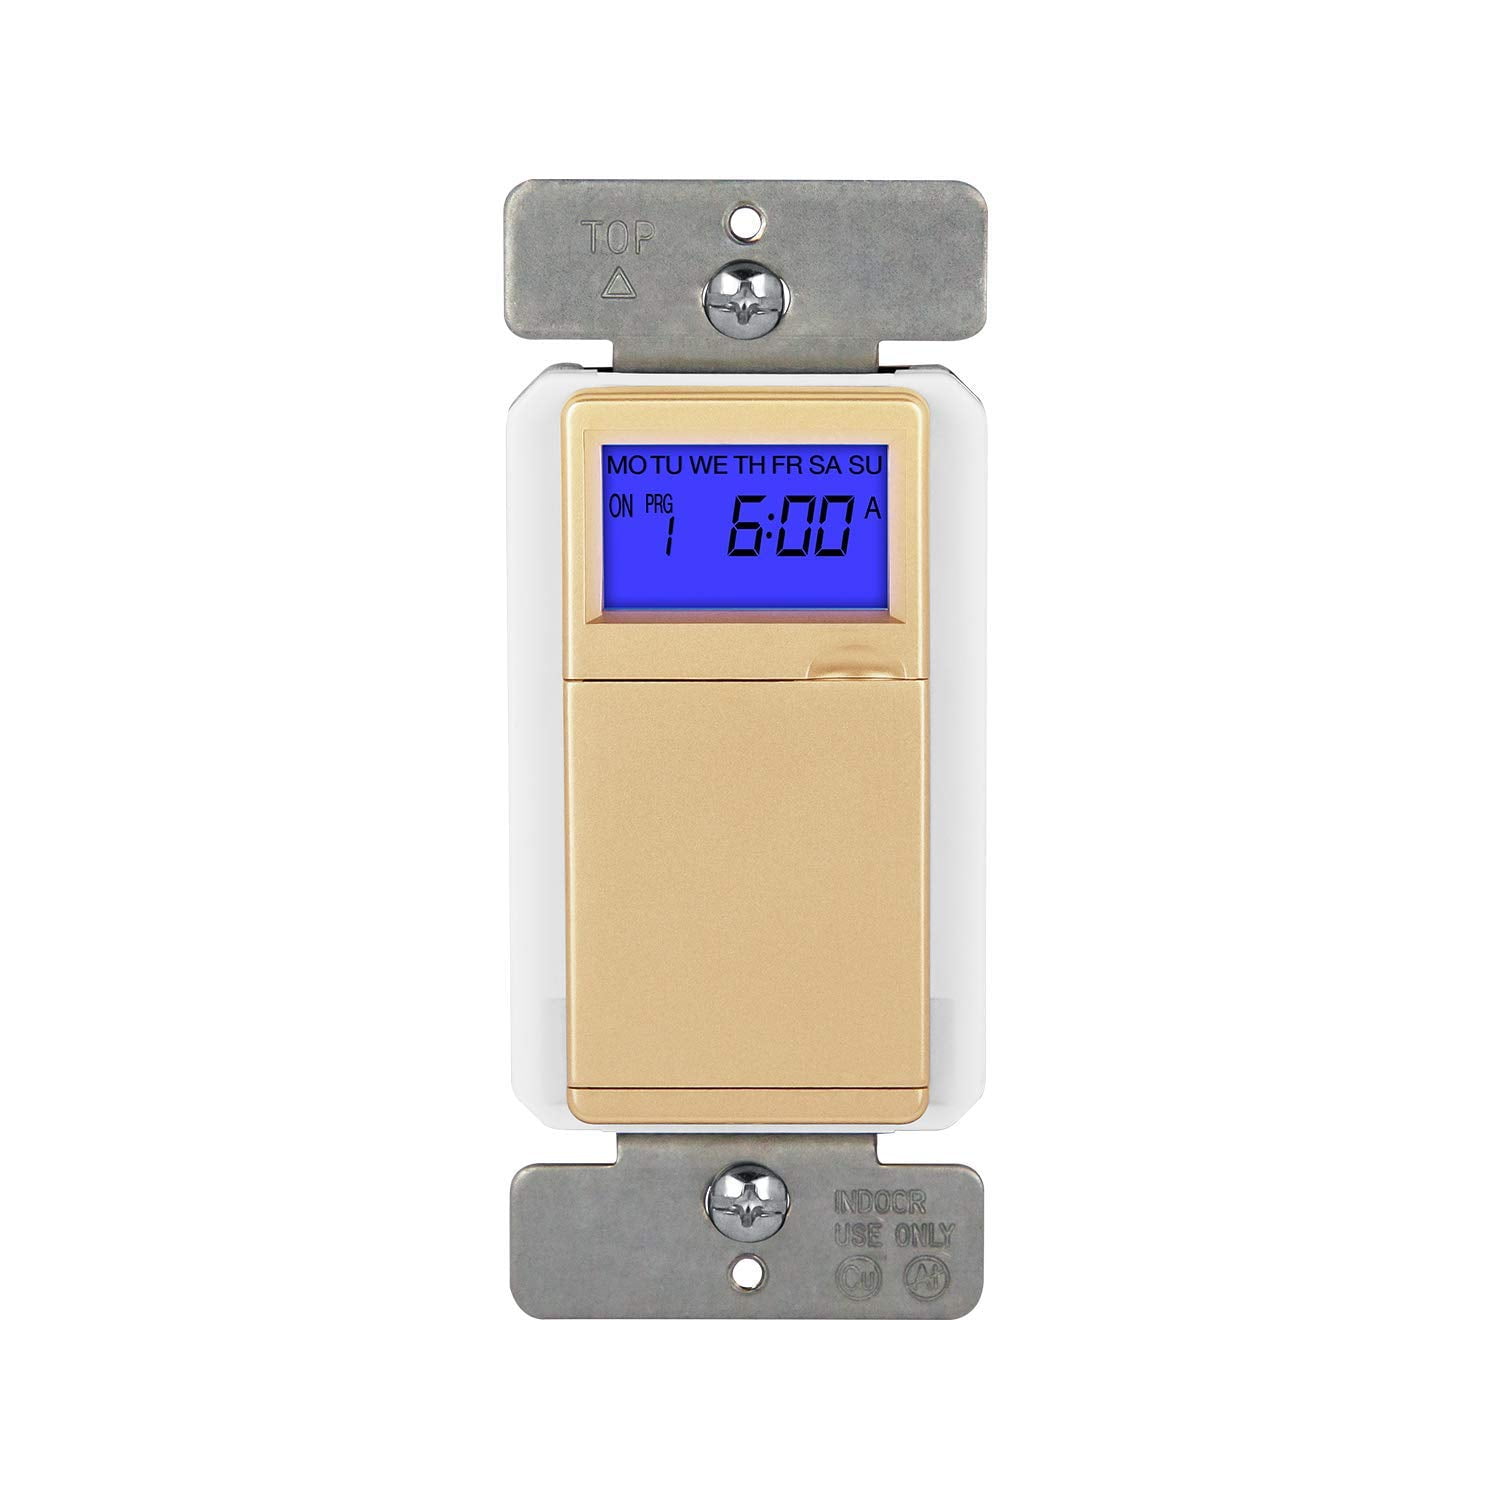 TOPGREENER Digital Astronomic Timer Programmable Listed, UL 120VAC, Wire Sunrise Pole TGT01-H-GD, 7-Day Gold 3-Way, Neutral Single Sunset, Switch, or Required